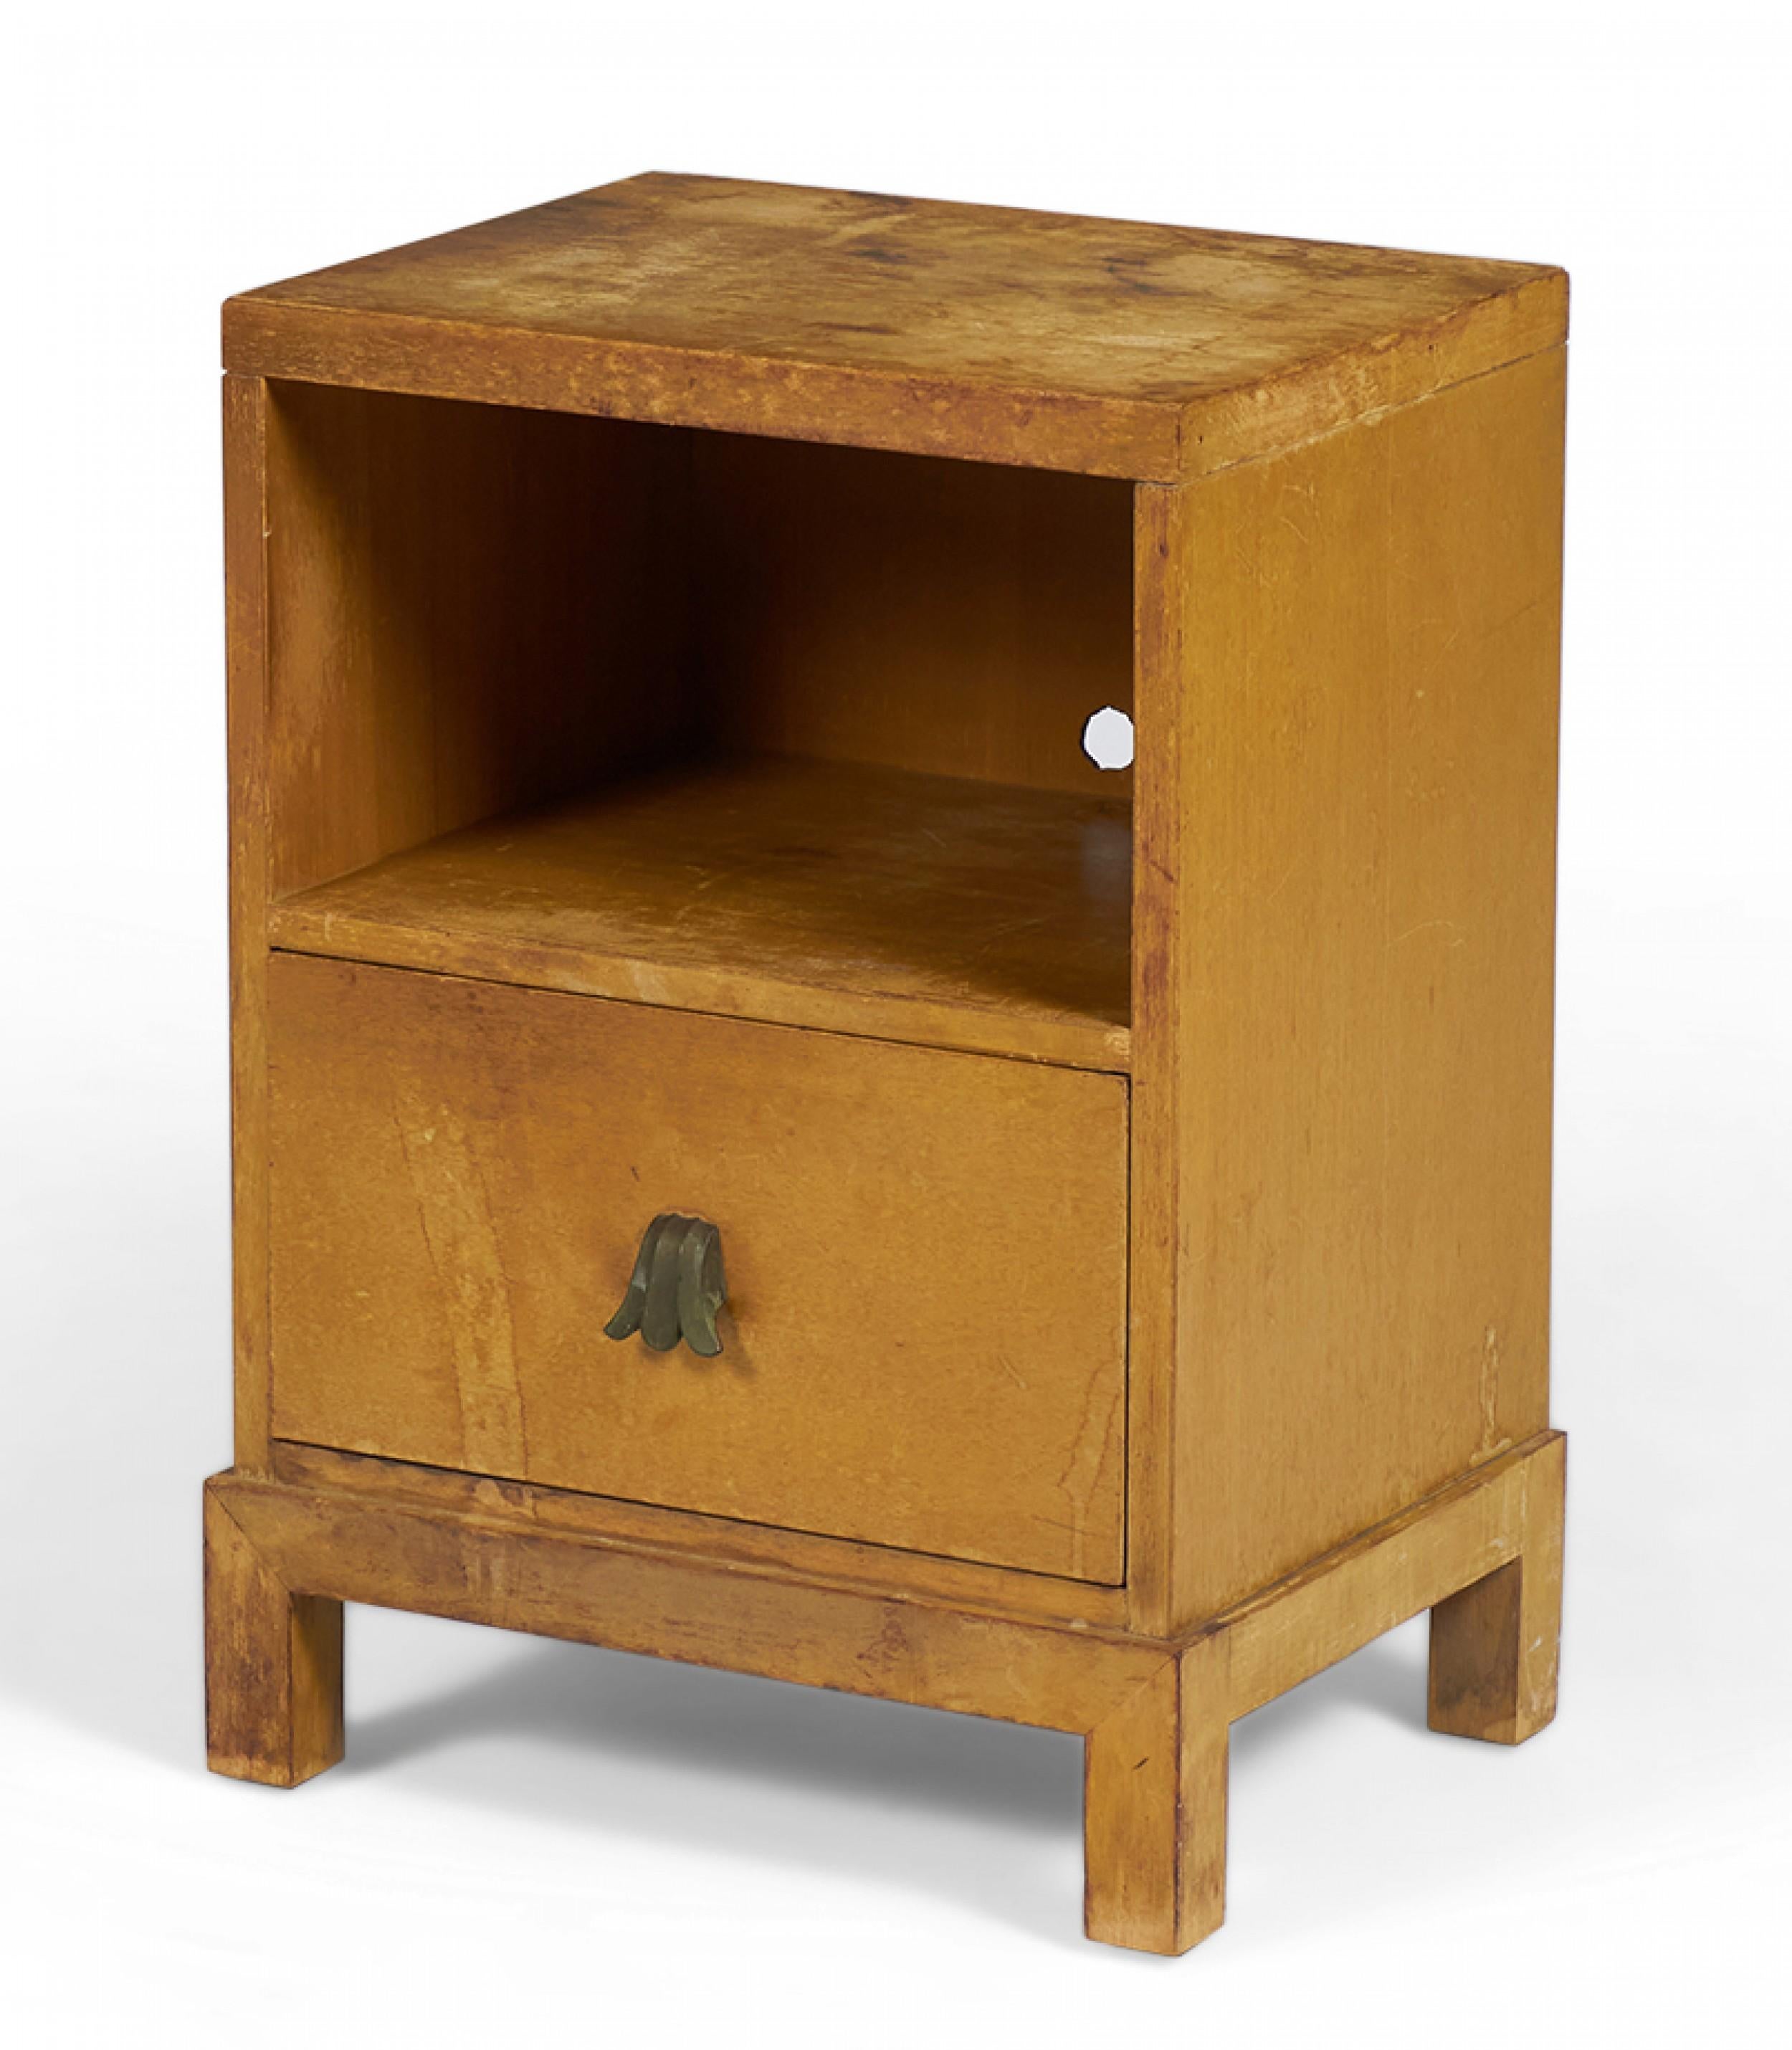 American Mid-Century (1950s) walnut nightstand with an open upper cabinet and a lower drawer with a curved foliate-shaped metal drawer pull, resting on a square Chinese-style base. (WIDDICOMB MODERN)(Similar pieces: DUF0145B-D)
